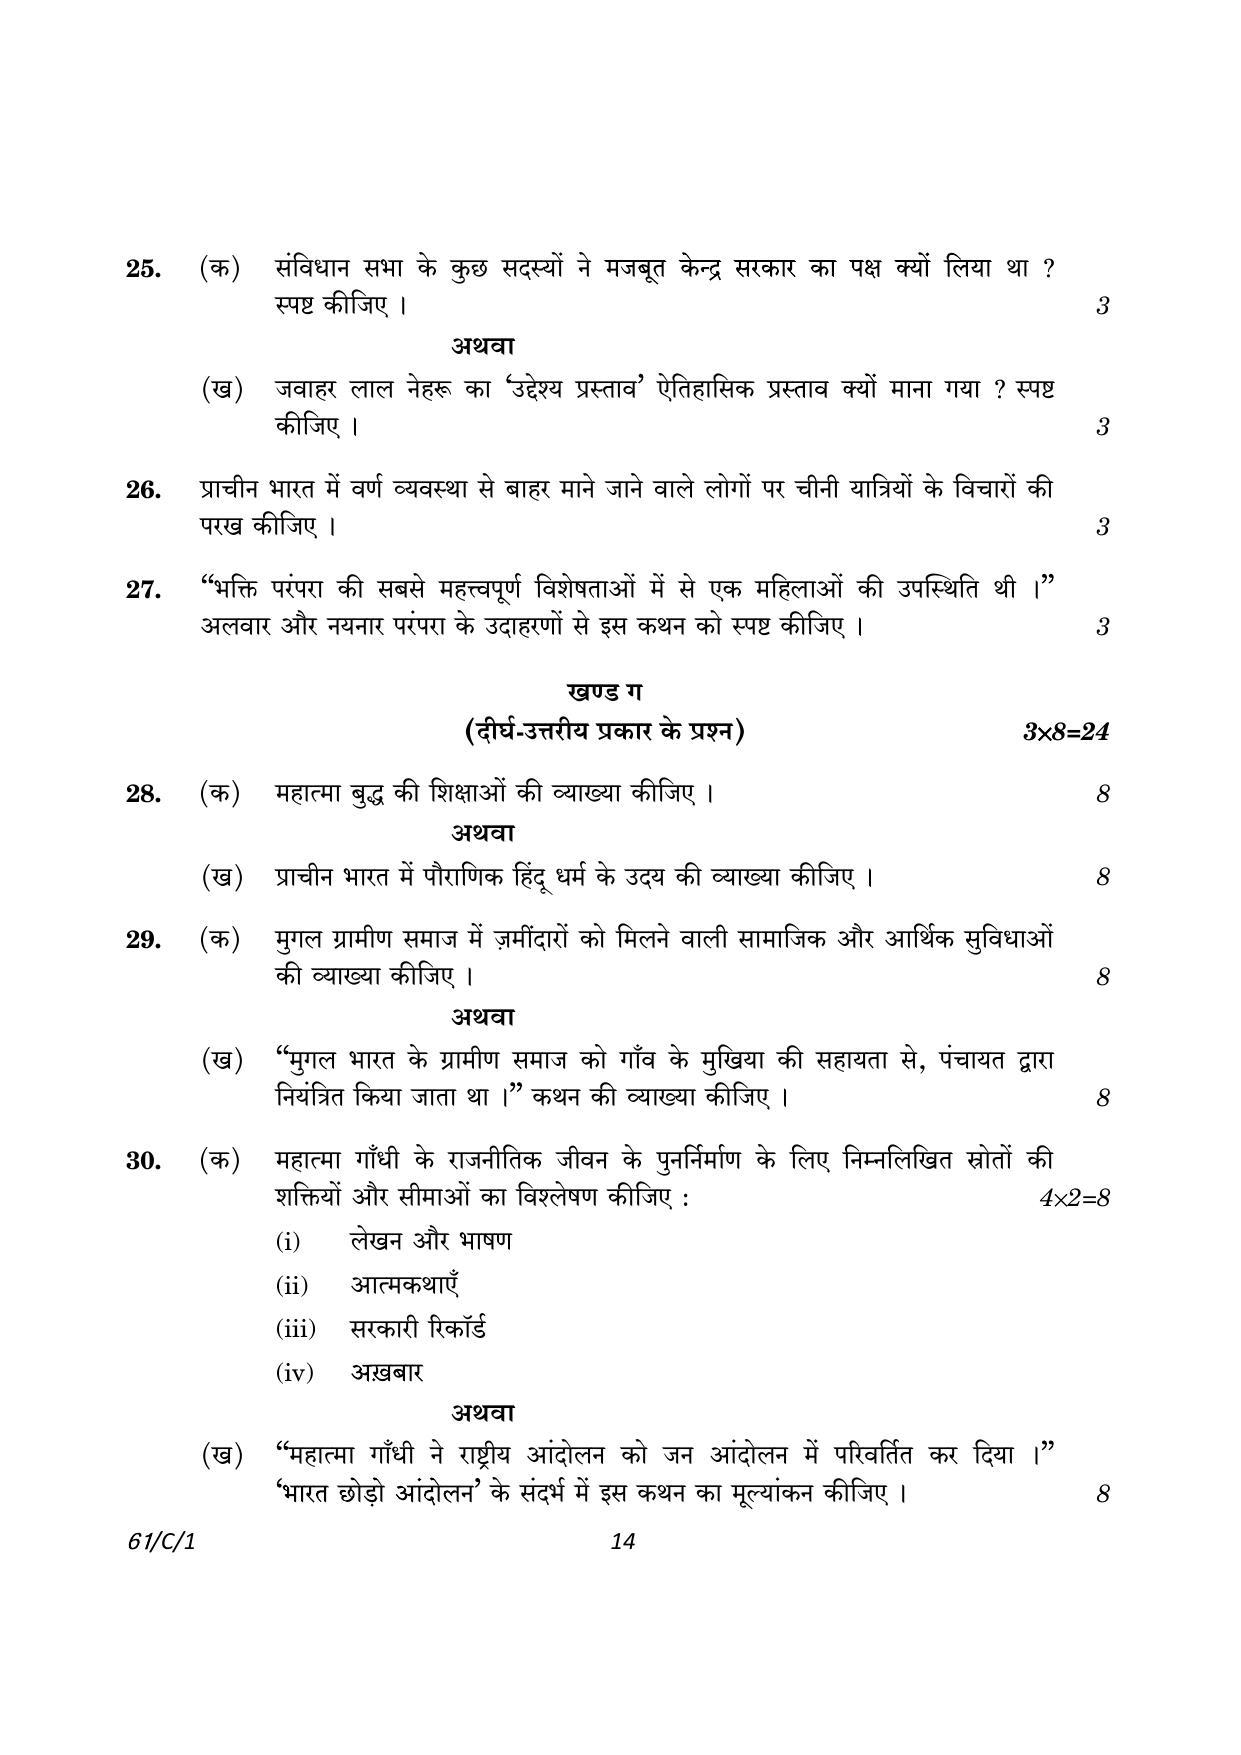 CBSE Class 12 61-1 History 2023 (Compartment) Question Paper - Page 14